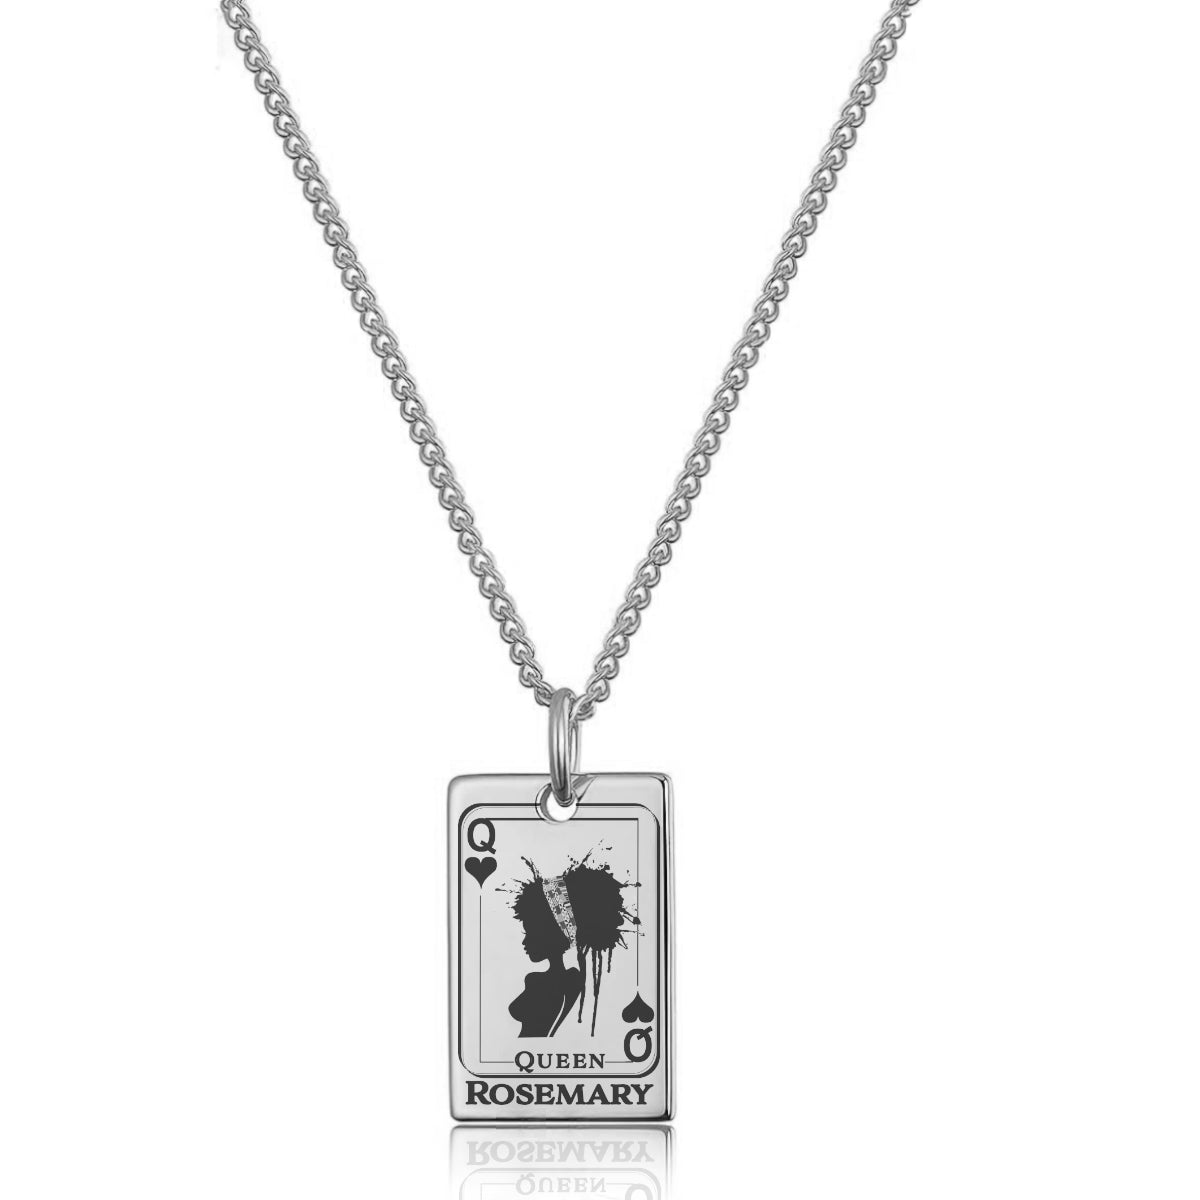 QUEEN OF SPADES QOS Hotwife Necklace Cuckold Lifestyle Jewellery BBC Silver  St1 £13.95 - PicClick UK